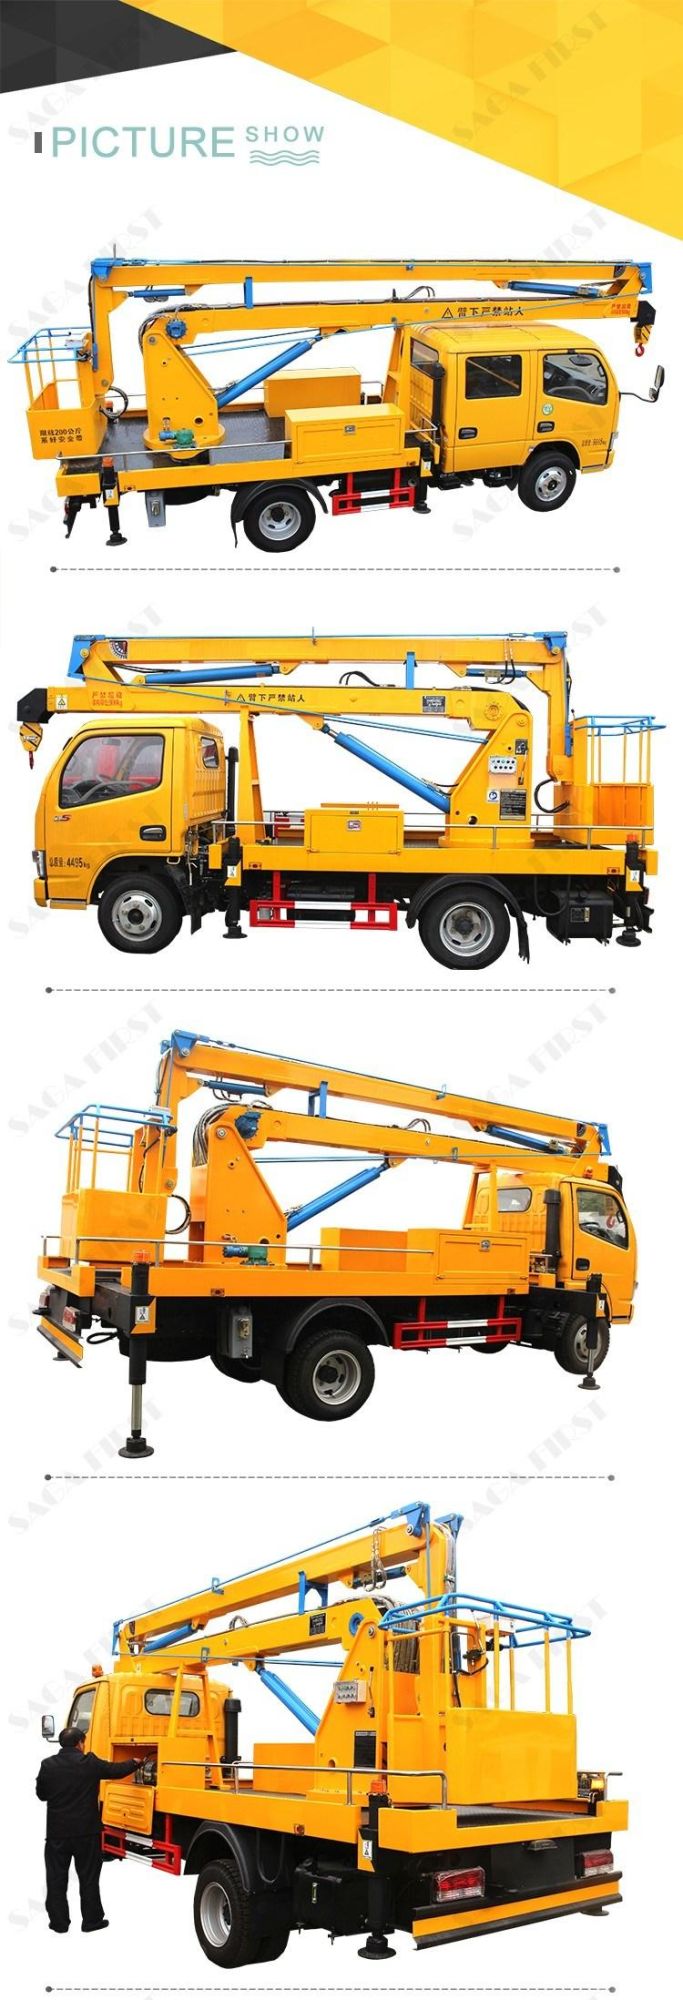 Vehicle Mounted Articulating Boom Lift Sky Lift for Cherry Picker